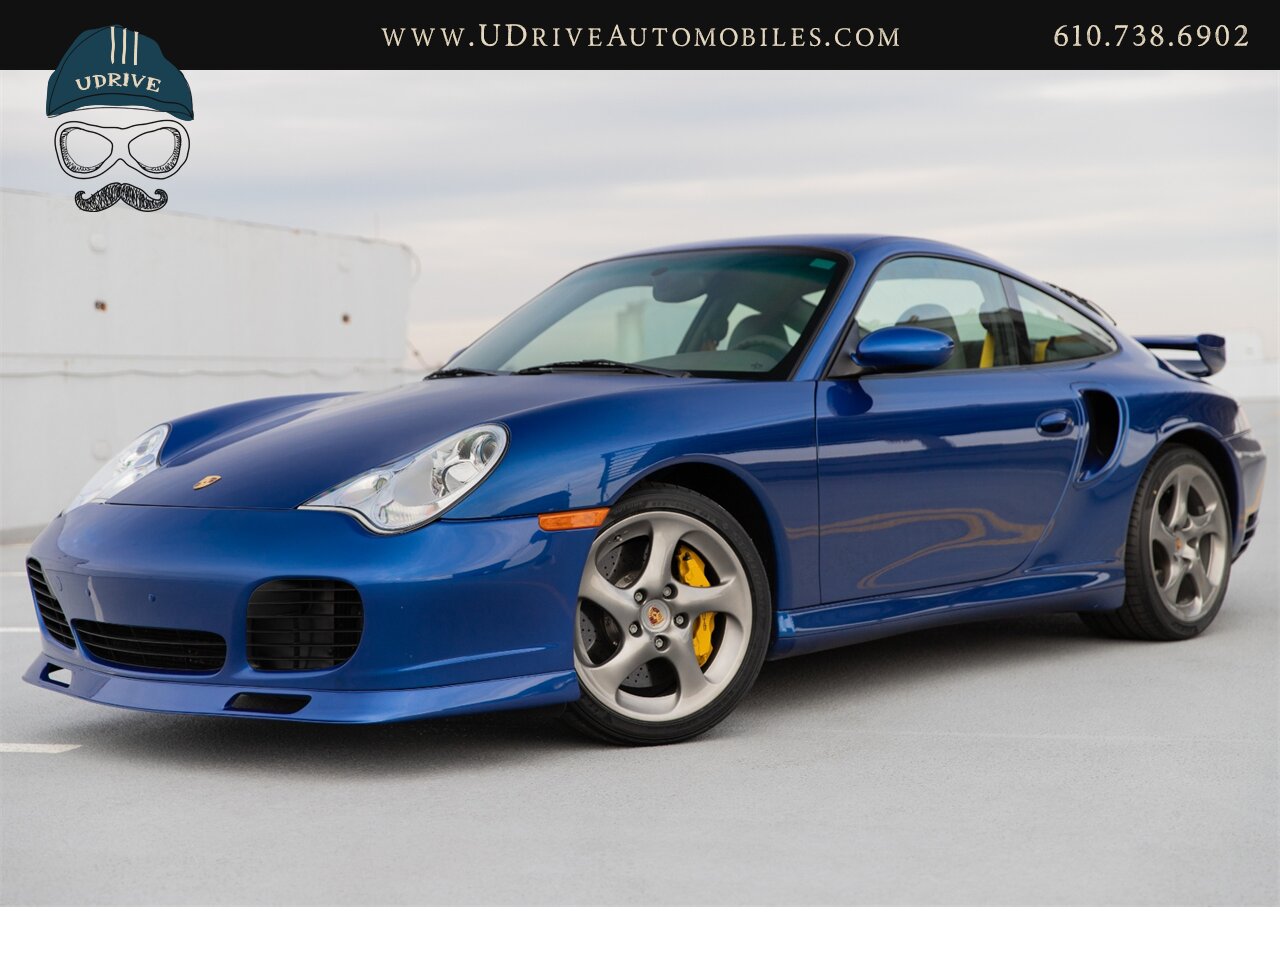 2005 Porsche 911 Turbo S Factory Aerokit Extremely Rare Cobalt Blue  Yellow Deviating Stitching 1 of a Kind Spec $160k MSRP - Photo 1 - West Chester, PA 19382